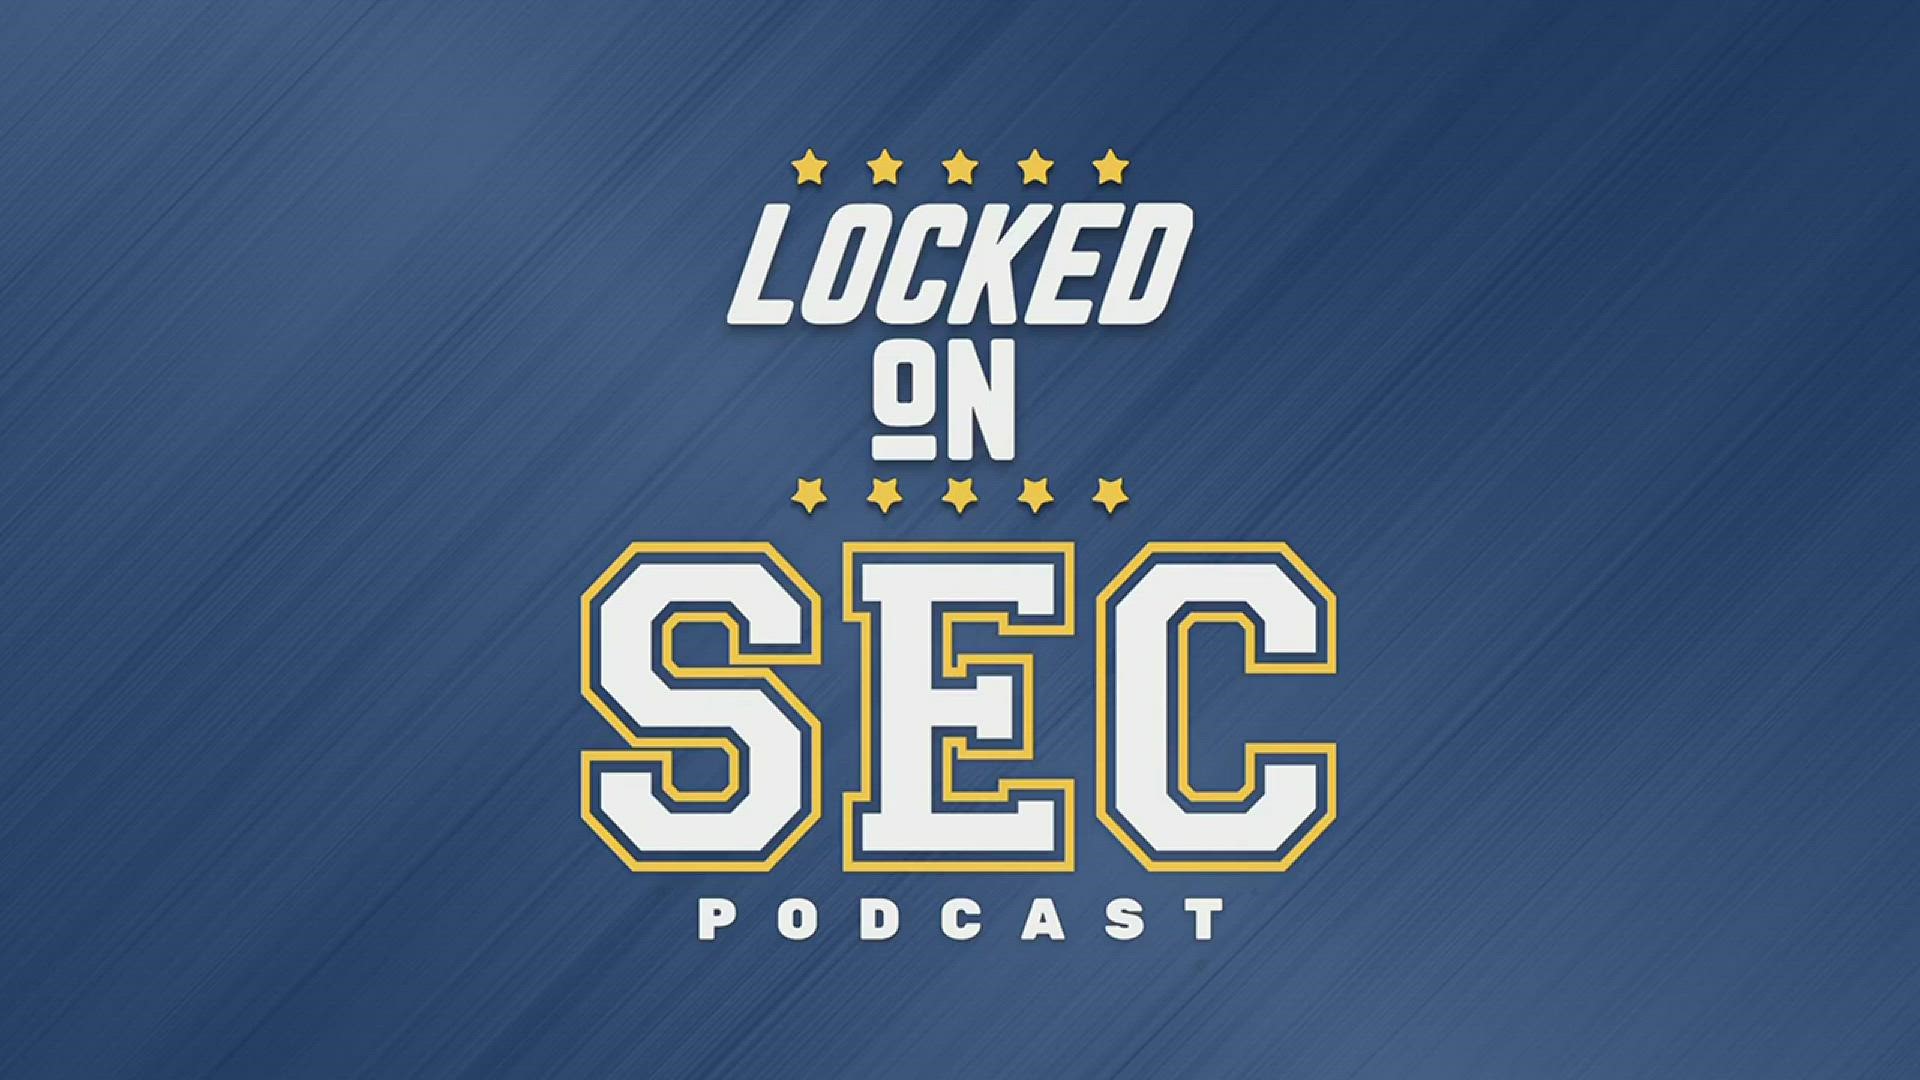 LSU QB Myles Brennan joins Chris Gordy on Locked On SEC as he is returning to LSU for his sixth season of eligibility after initially entering the transfer portal.